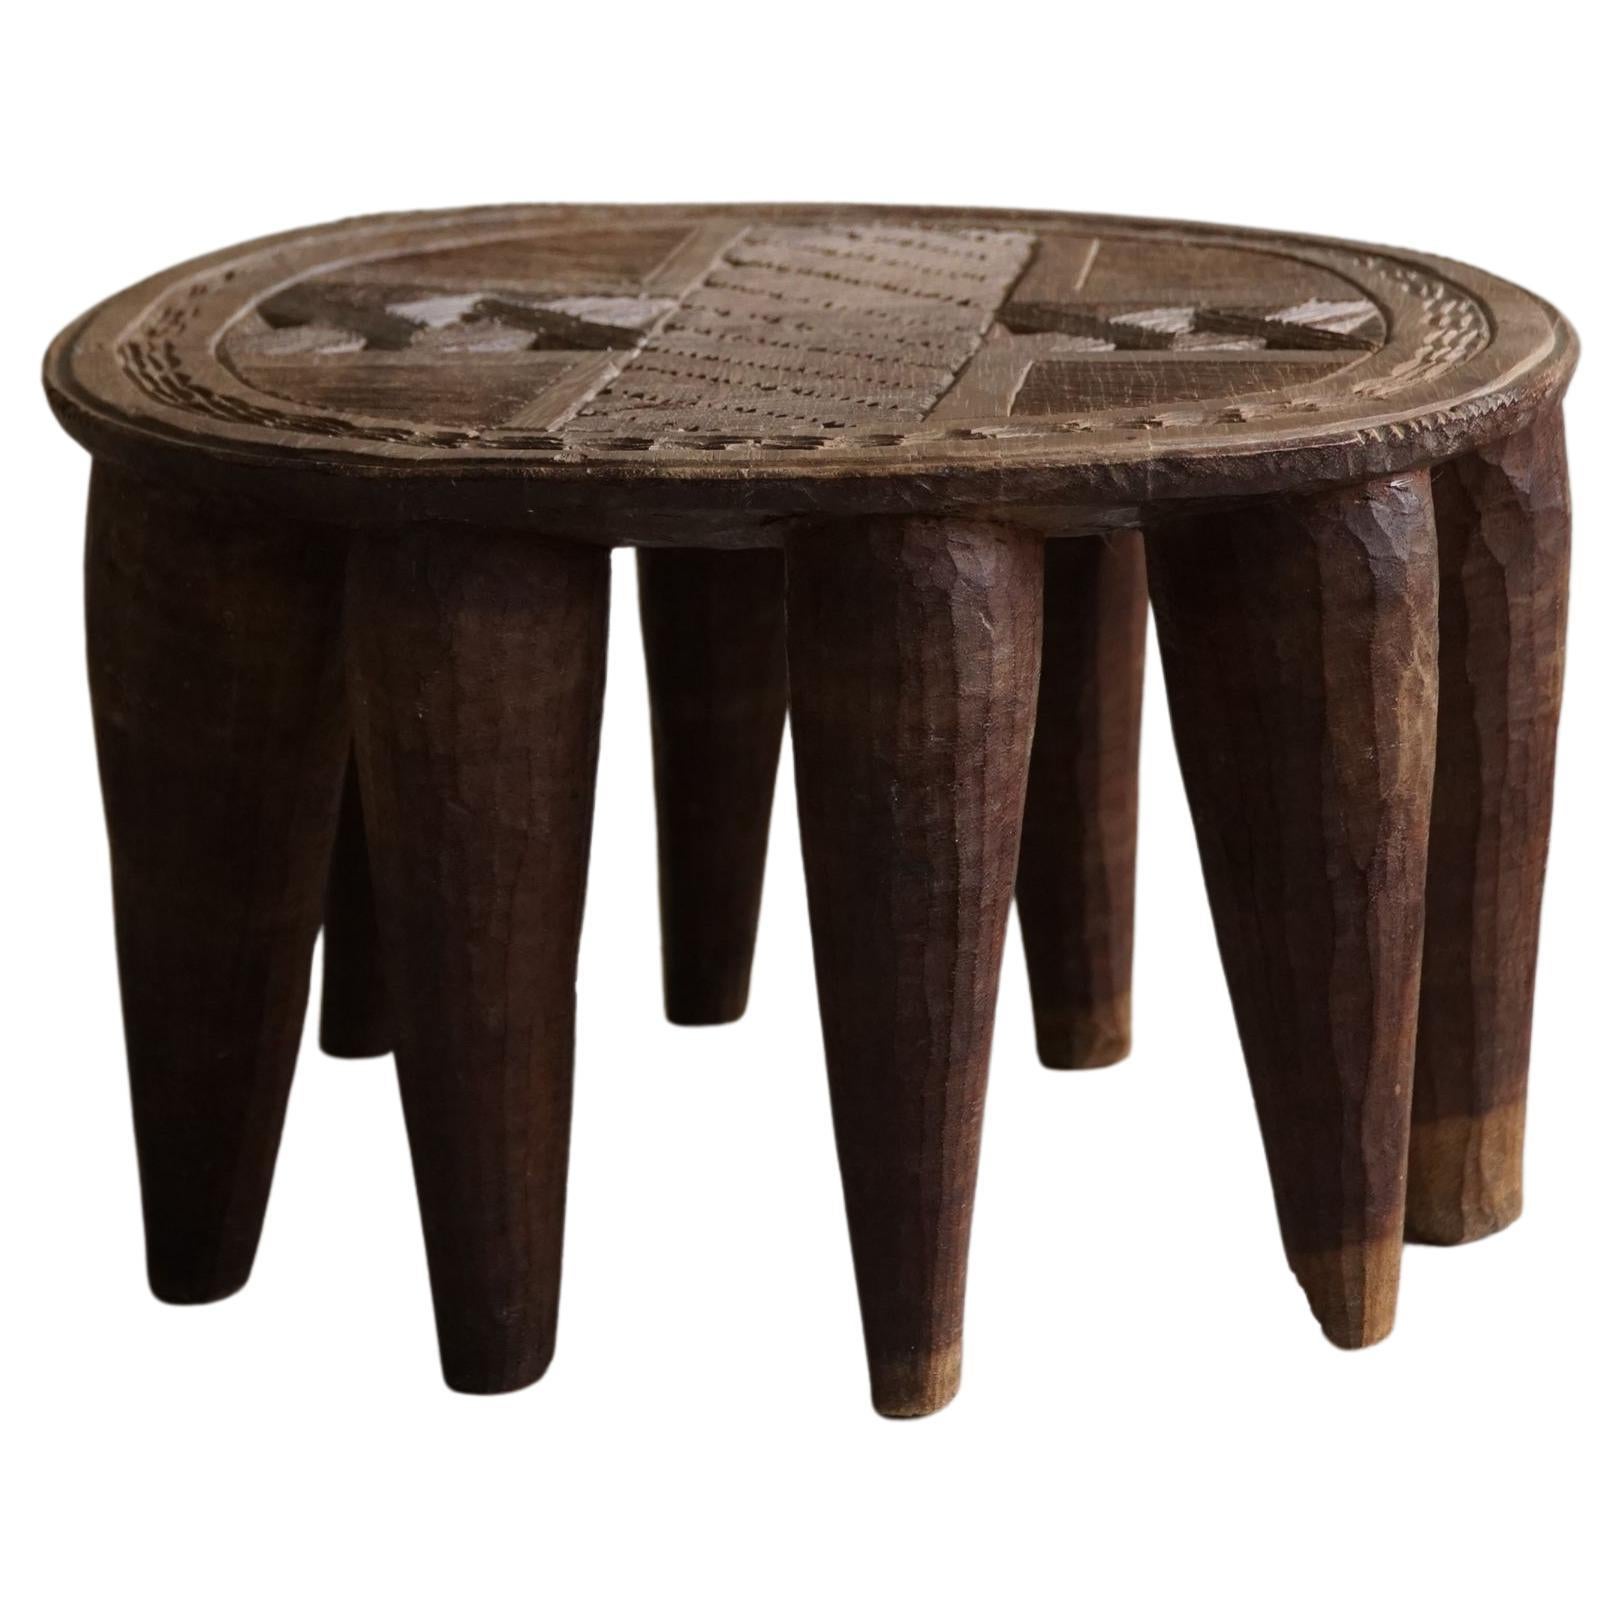 Hand Carved "Nupe Tribe" Stool With 10 Legs, Wabi Sabi, Made in Nigeria, 1950s For Sale